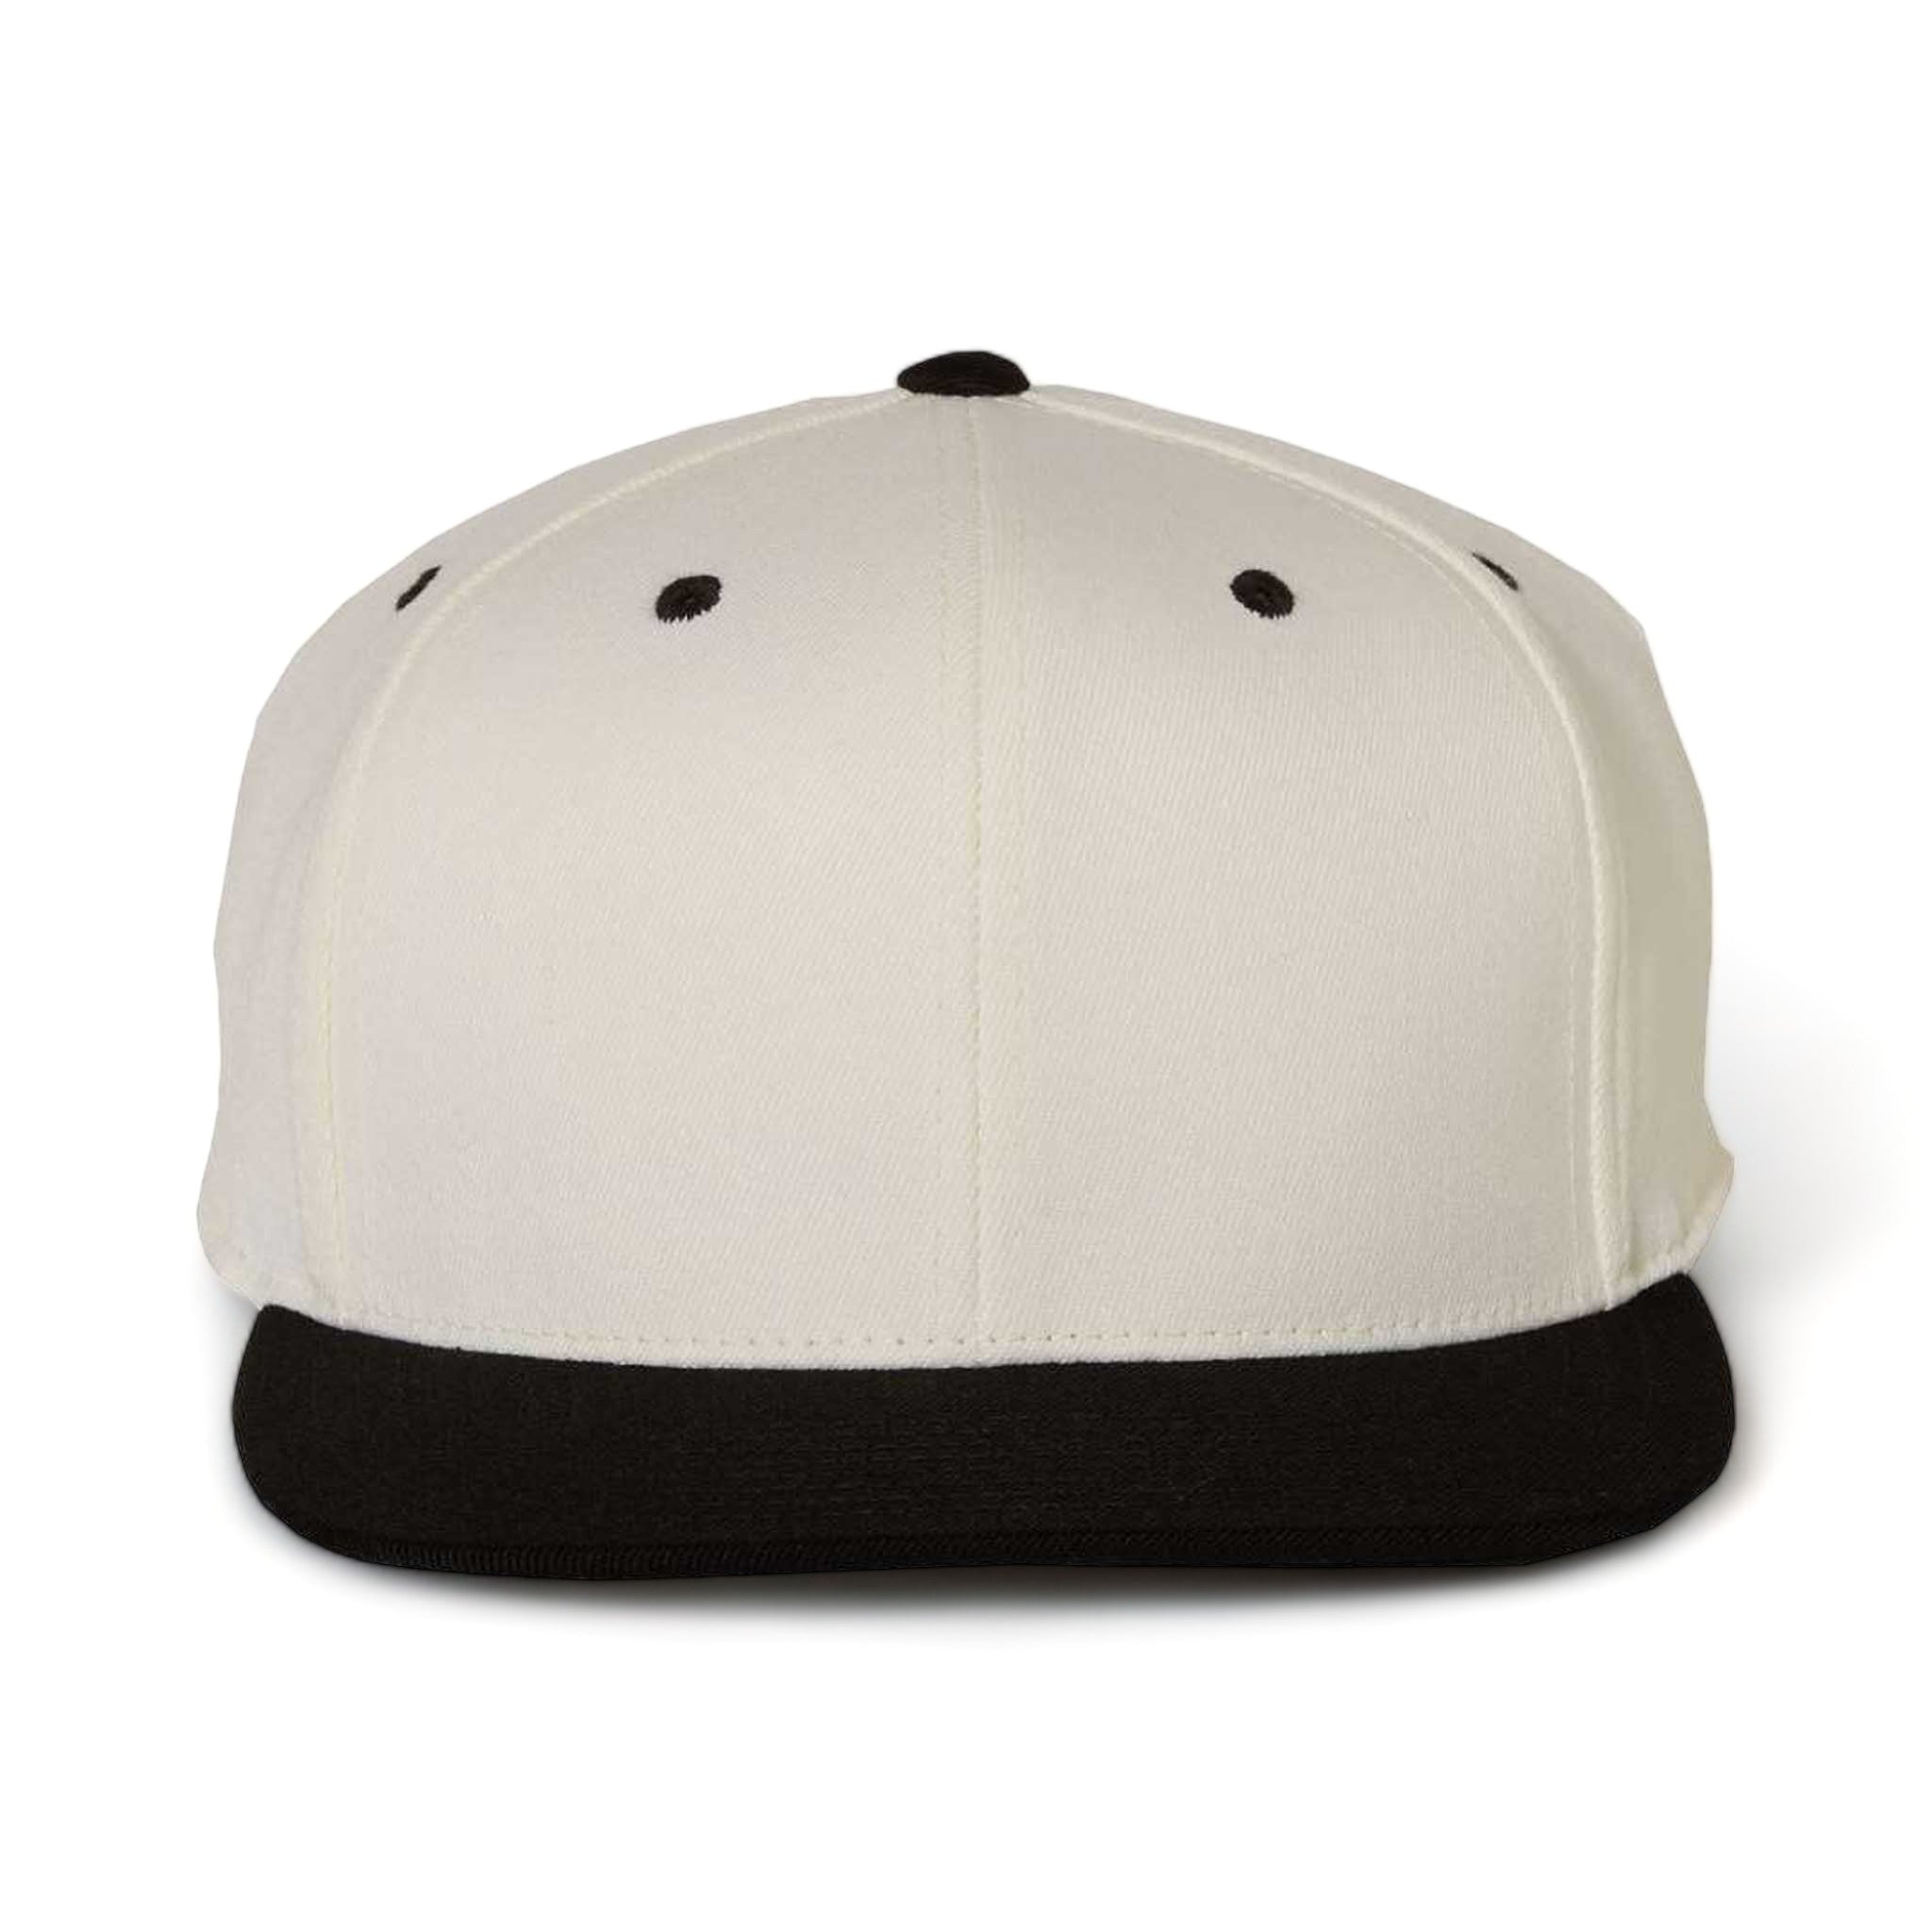 Front view of Flexfit 110F custom hat in natural and black